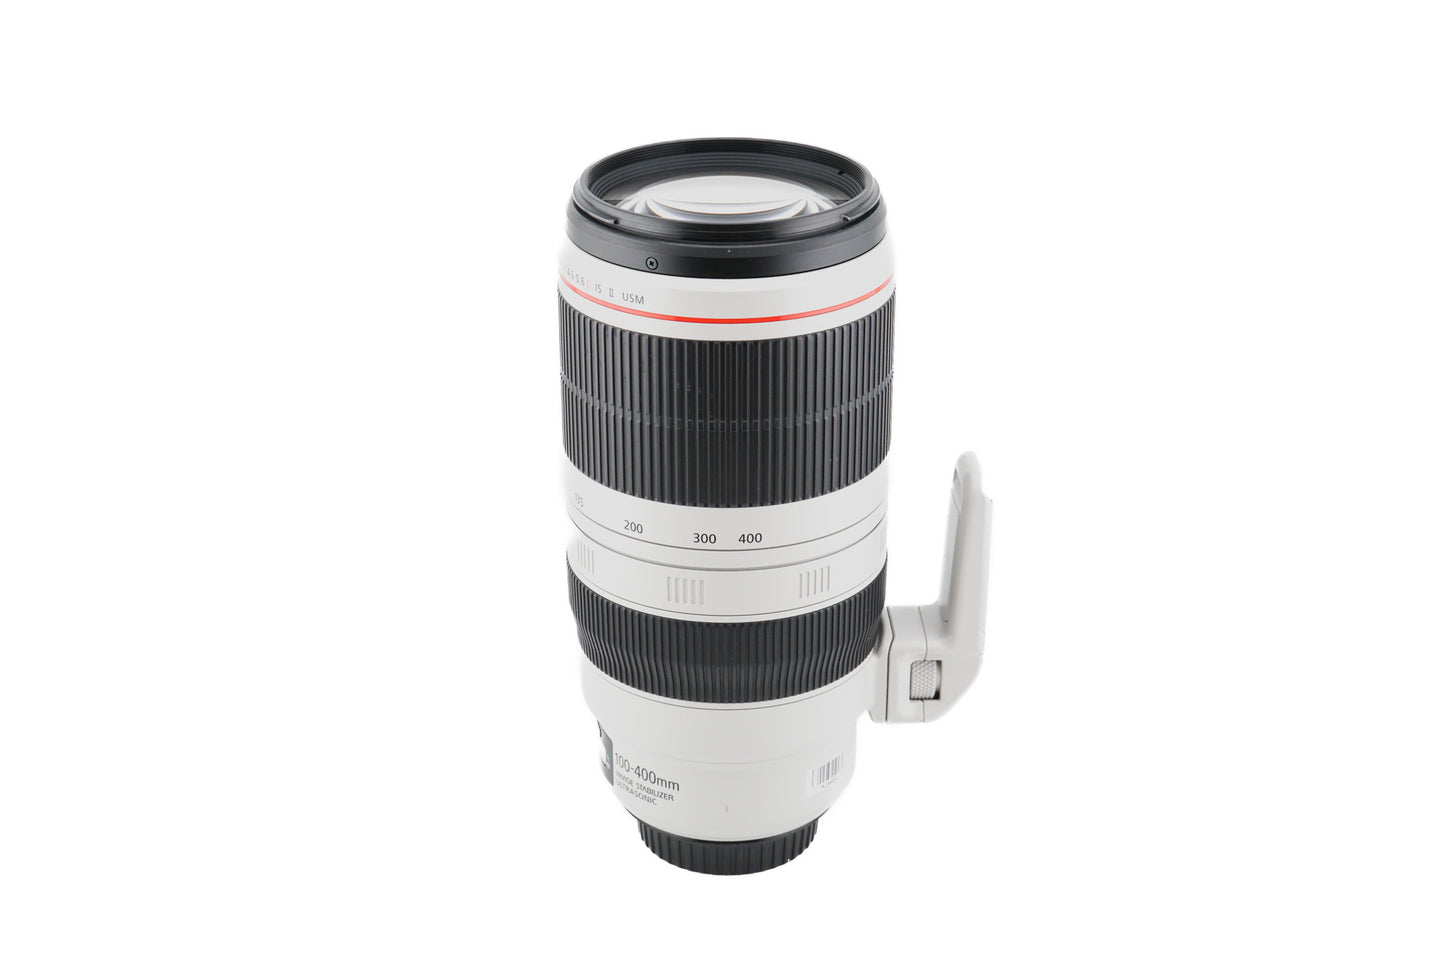 Canon 100-400mm f4.5-5.6 L IS USM II